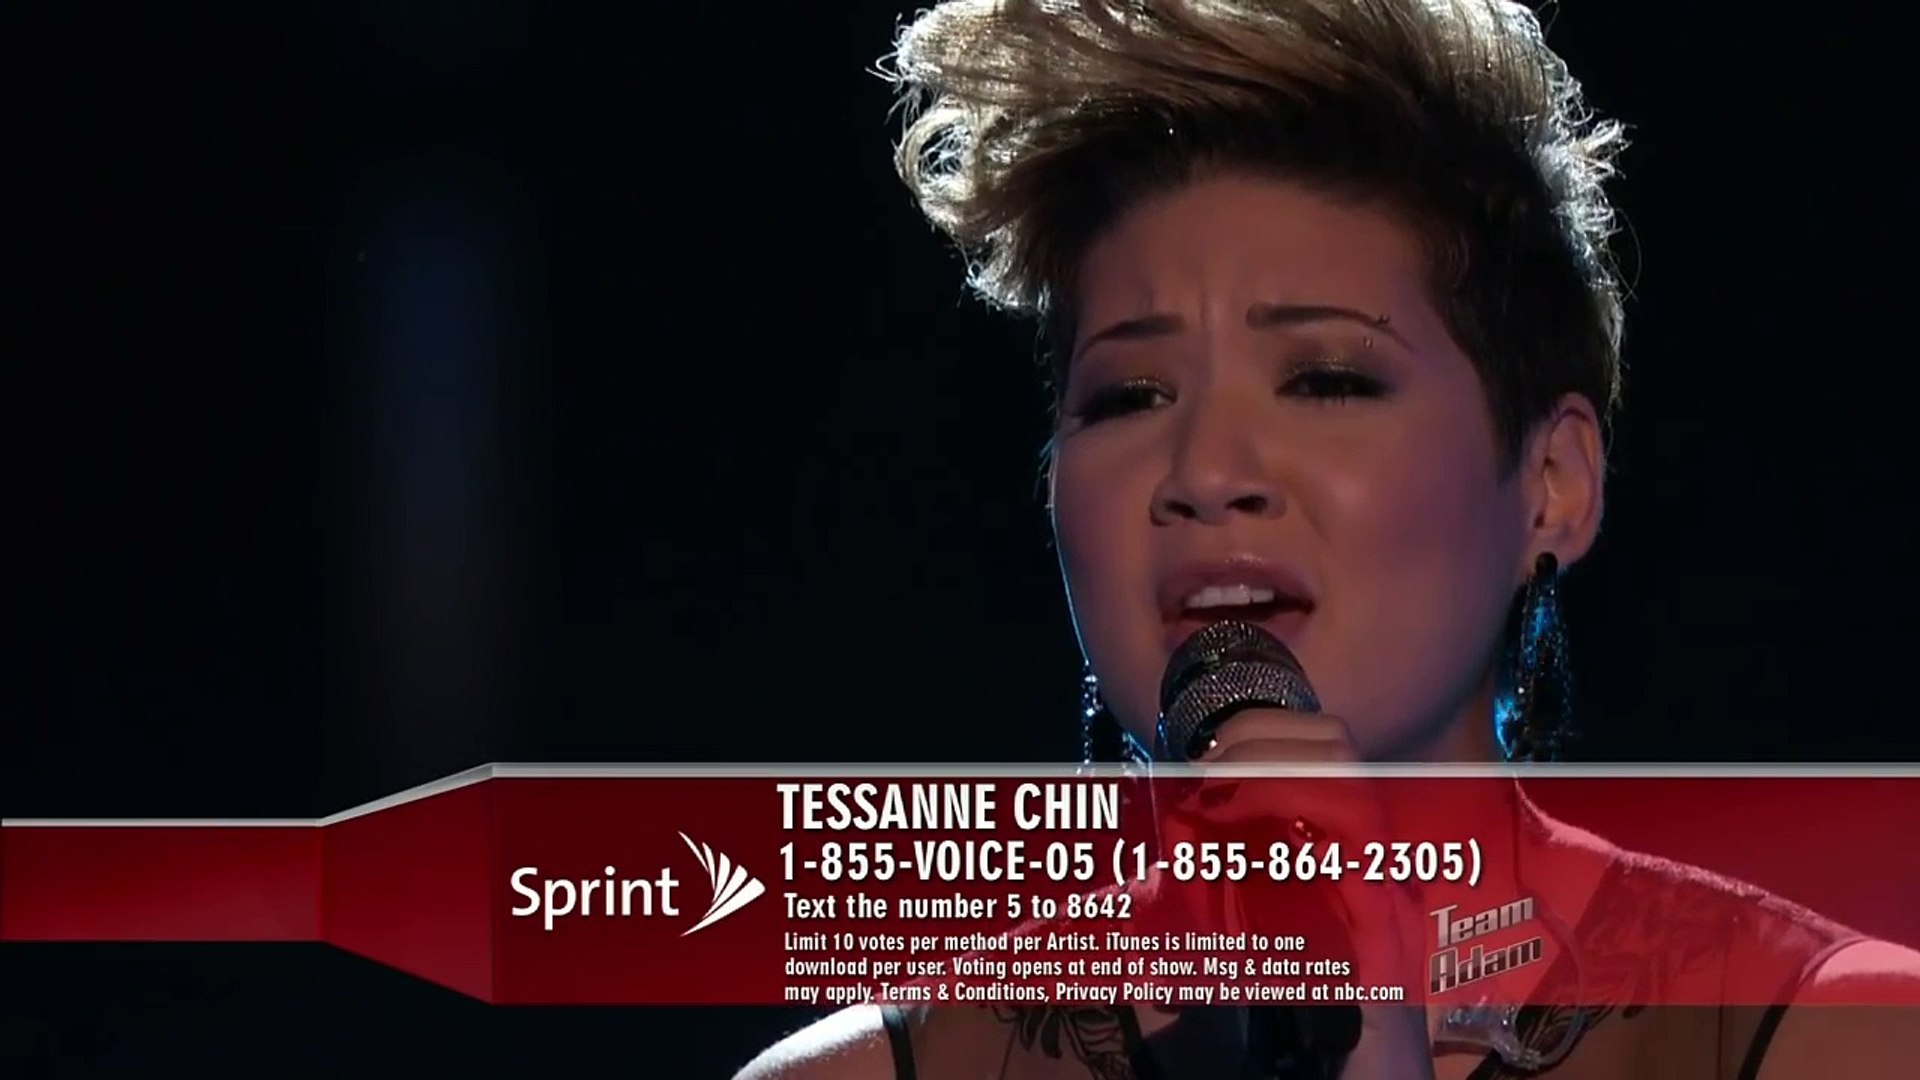 bridge over troubled water tessanne chin